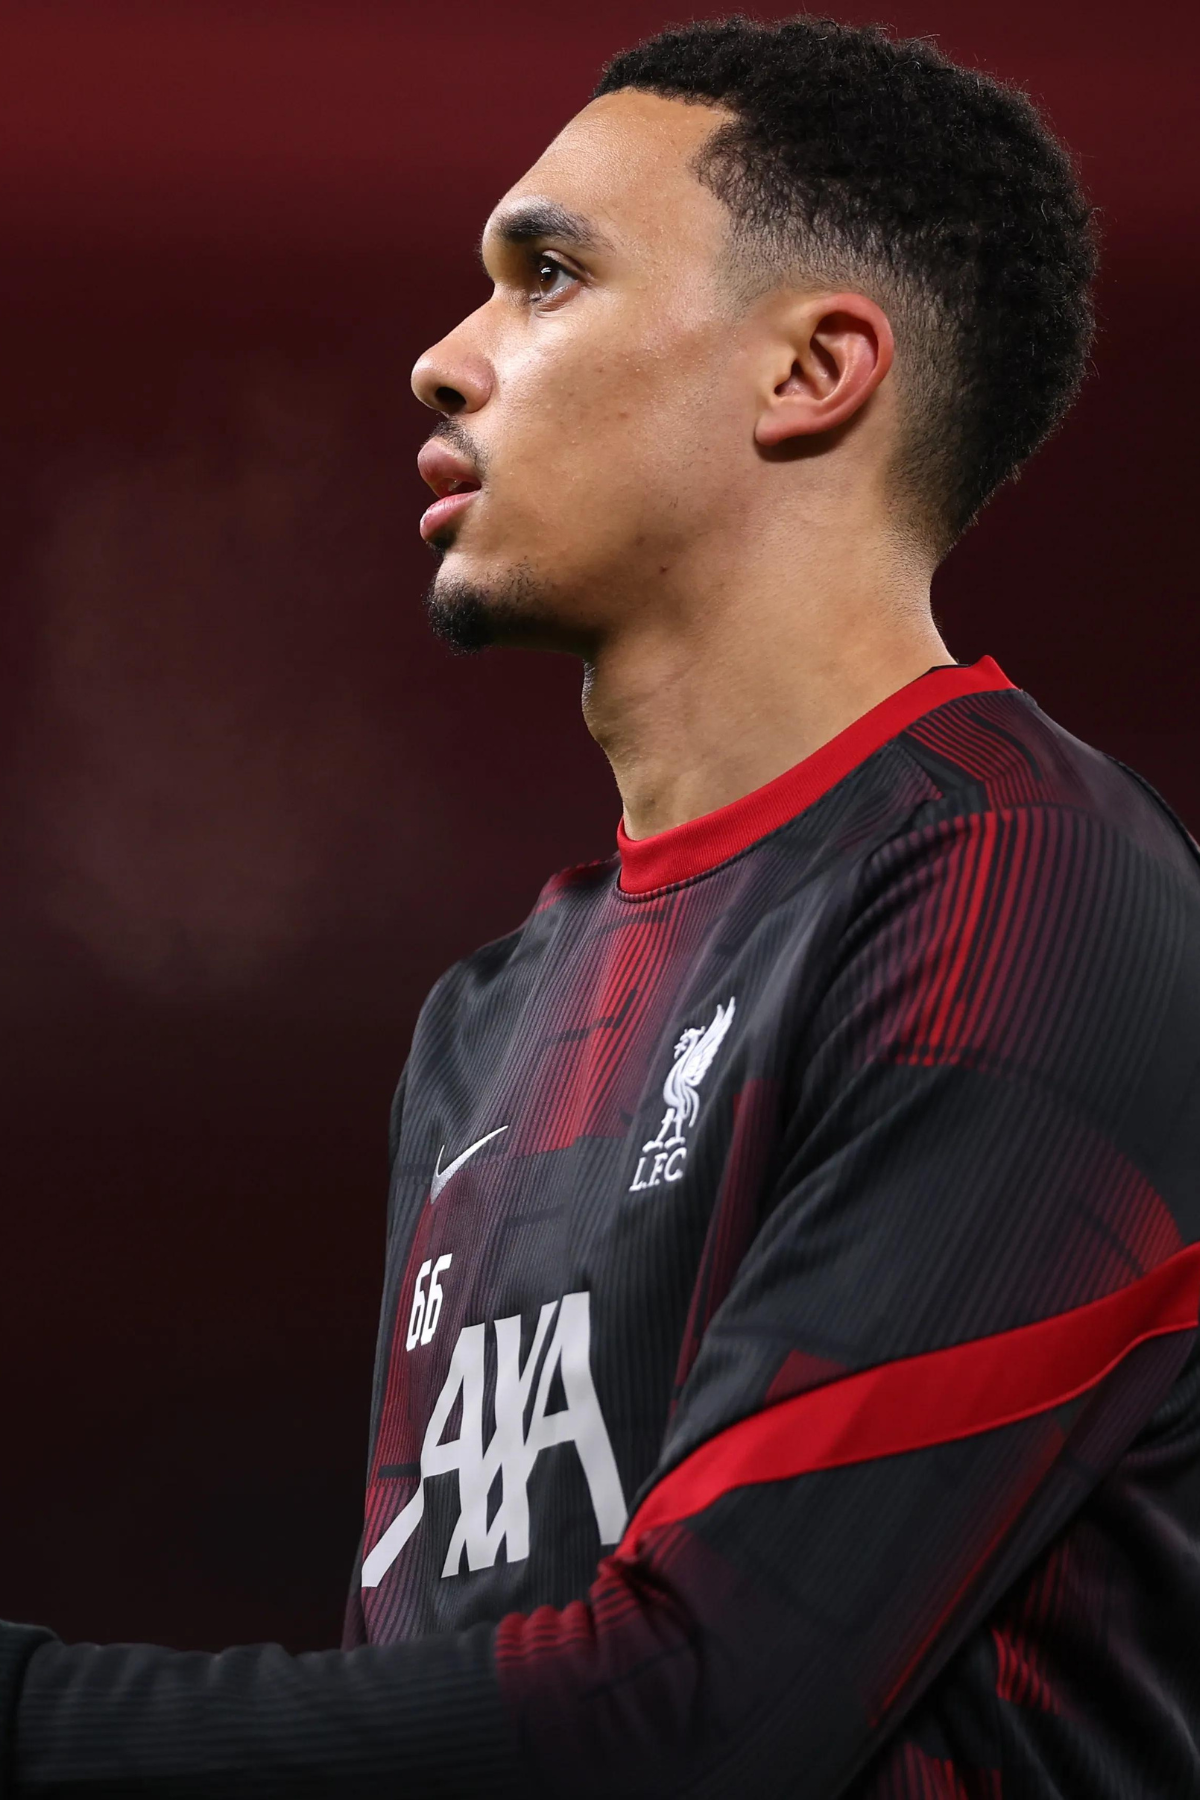 "Means more": Trent Alexander-Arnold on why Liverpool success is more valuable than Man City's